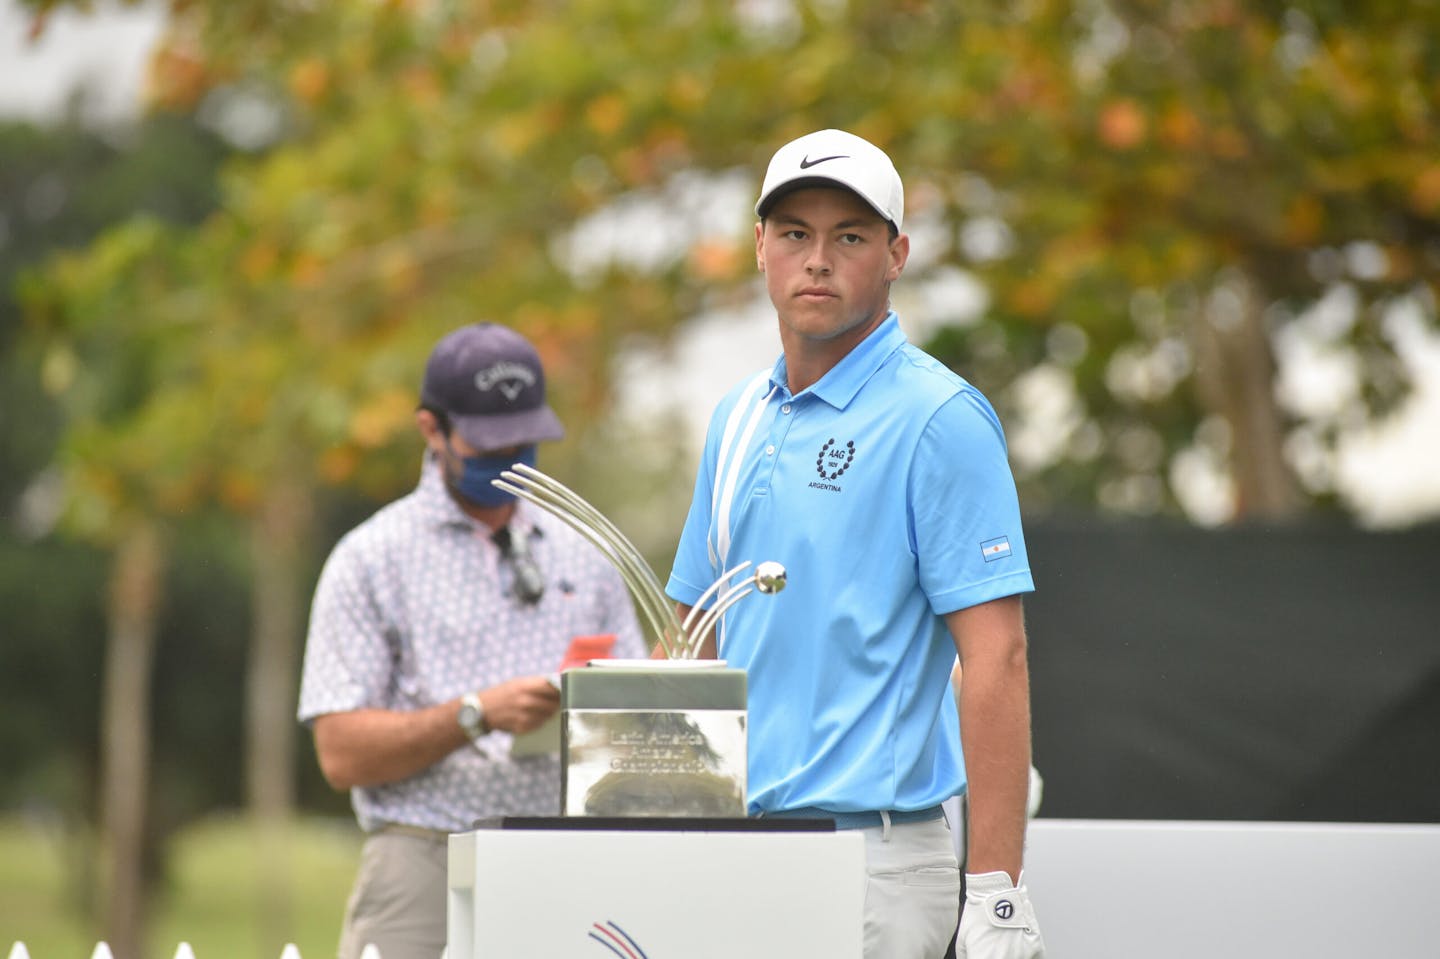 La Romana, DOMINICAN REPUBLIC: Abel Gallegos of Argentina pictured at the 2022 Latin America Amateur Championship at Casa de Campo Resort during Final Round on January 23rd, 2022.